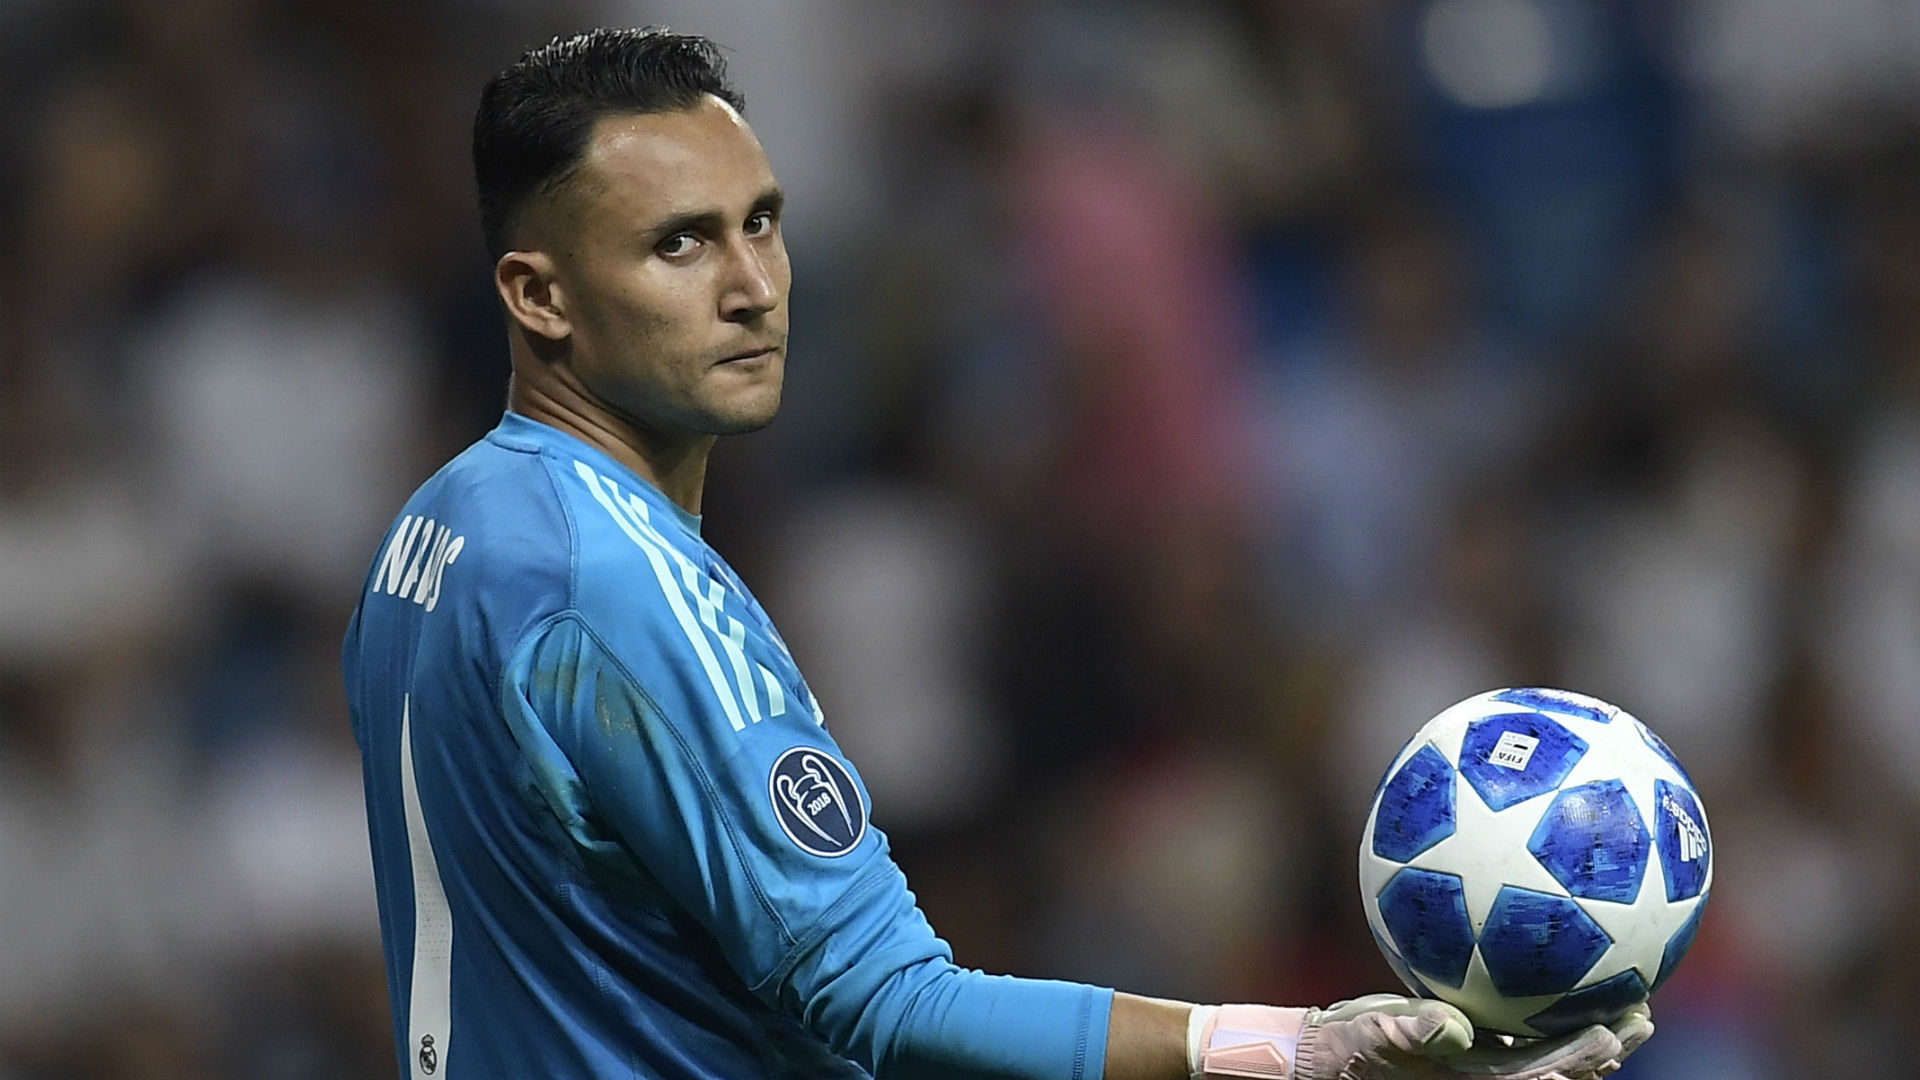 Keylor Navas Real Madrid 2018-19 - Courtois Roma Real Madrid , HD Wallpaper & Backgrounds